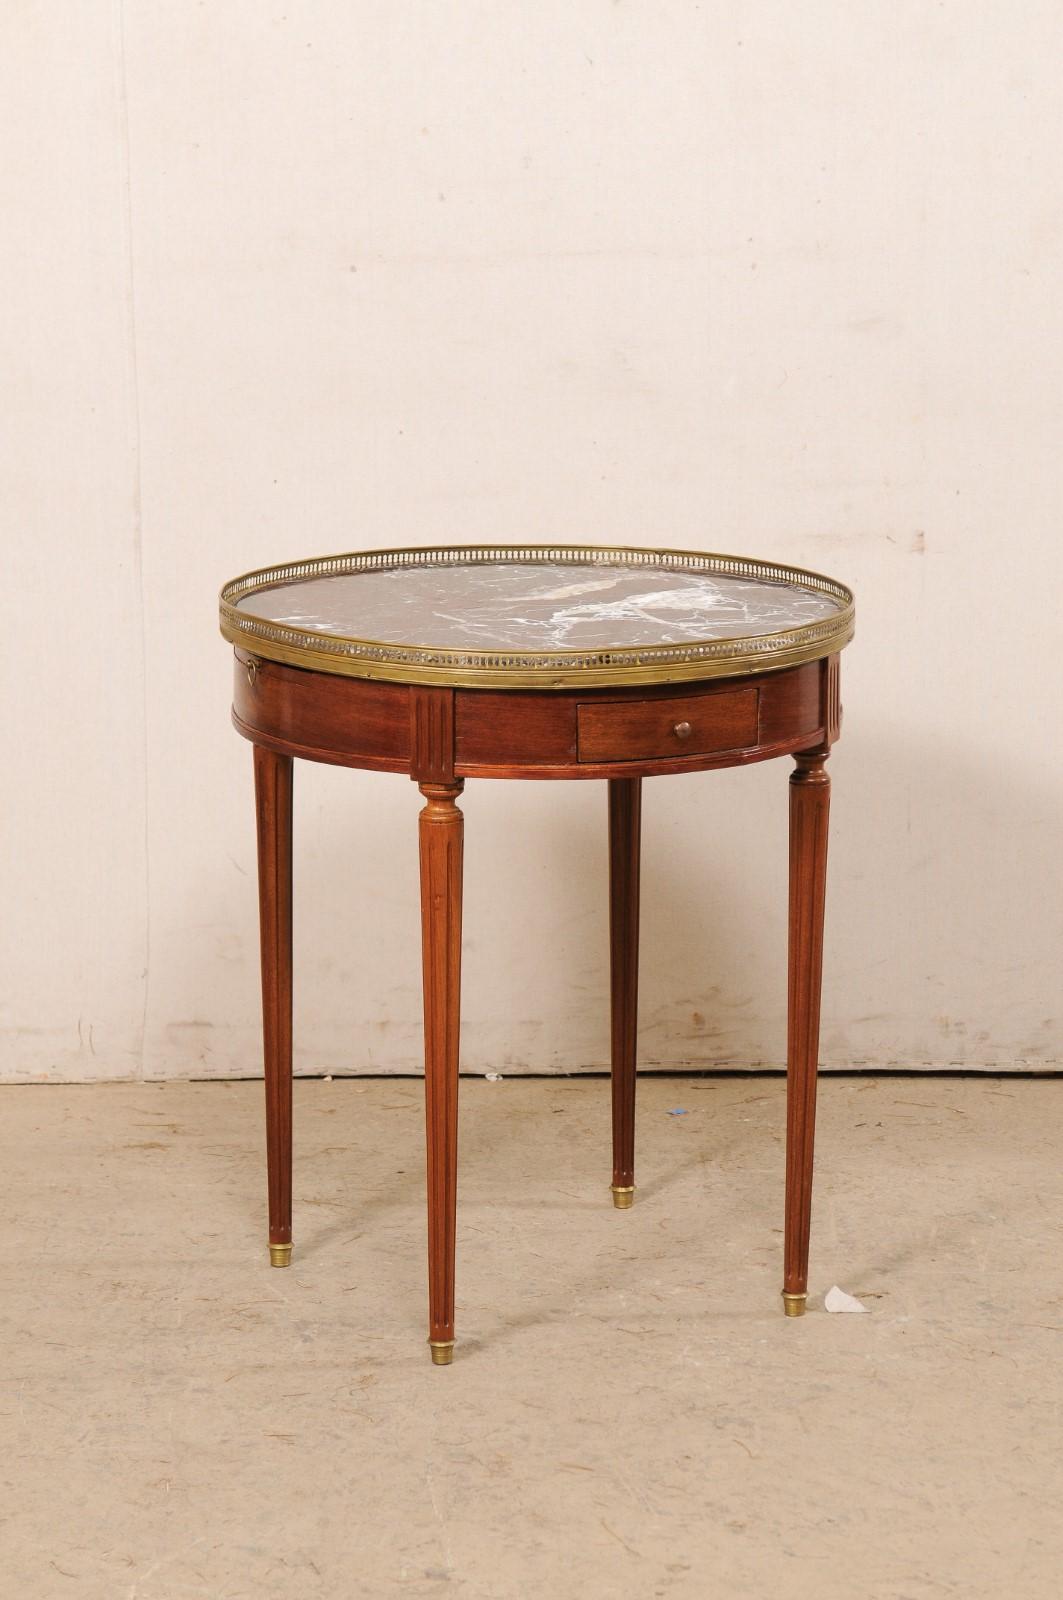 A French occasional cherry-wood table with brass and marble top, from the early 20th century. This antique table from France has a round-shaped beveled edge stone top (in hues of dark wine, white, black, and some light tan veining), nicely framed